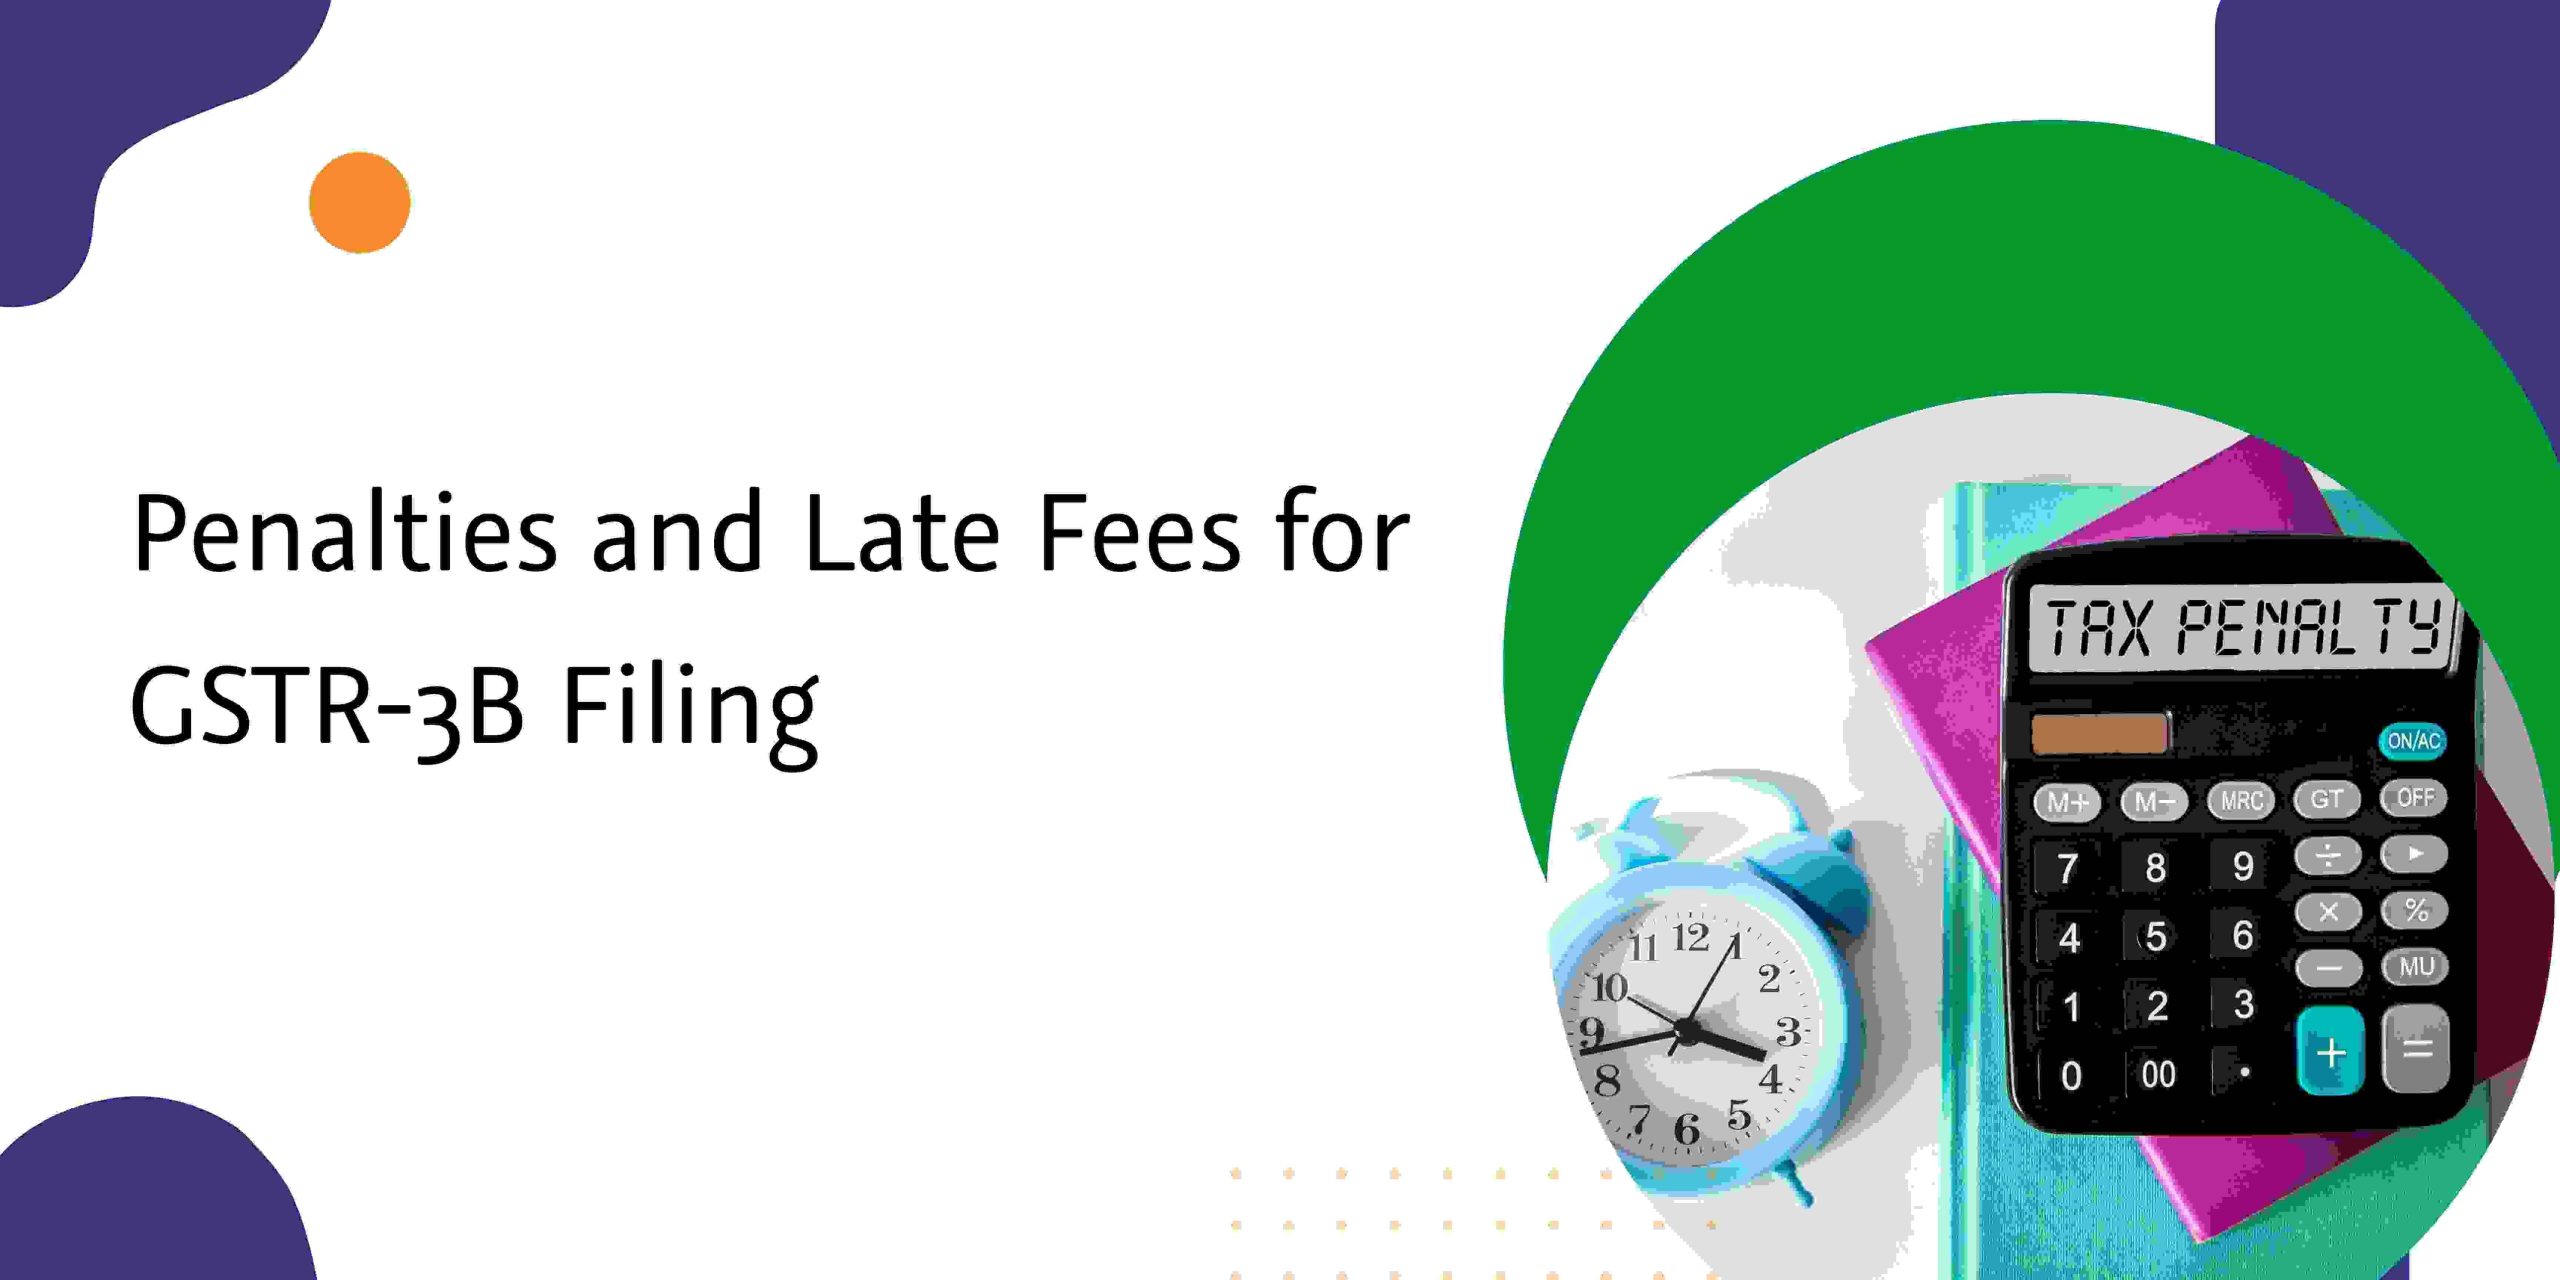 You are currently viewing Penalties and Late Fees for GSTR-3B Filing